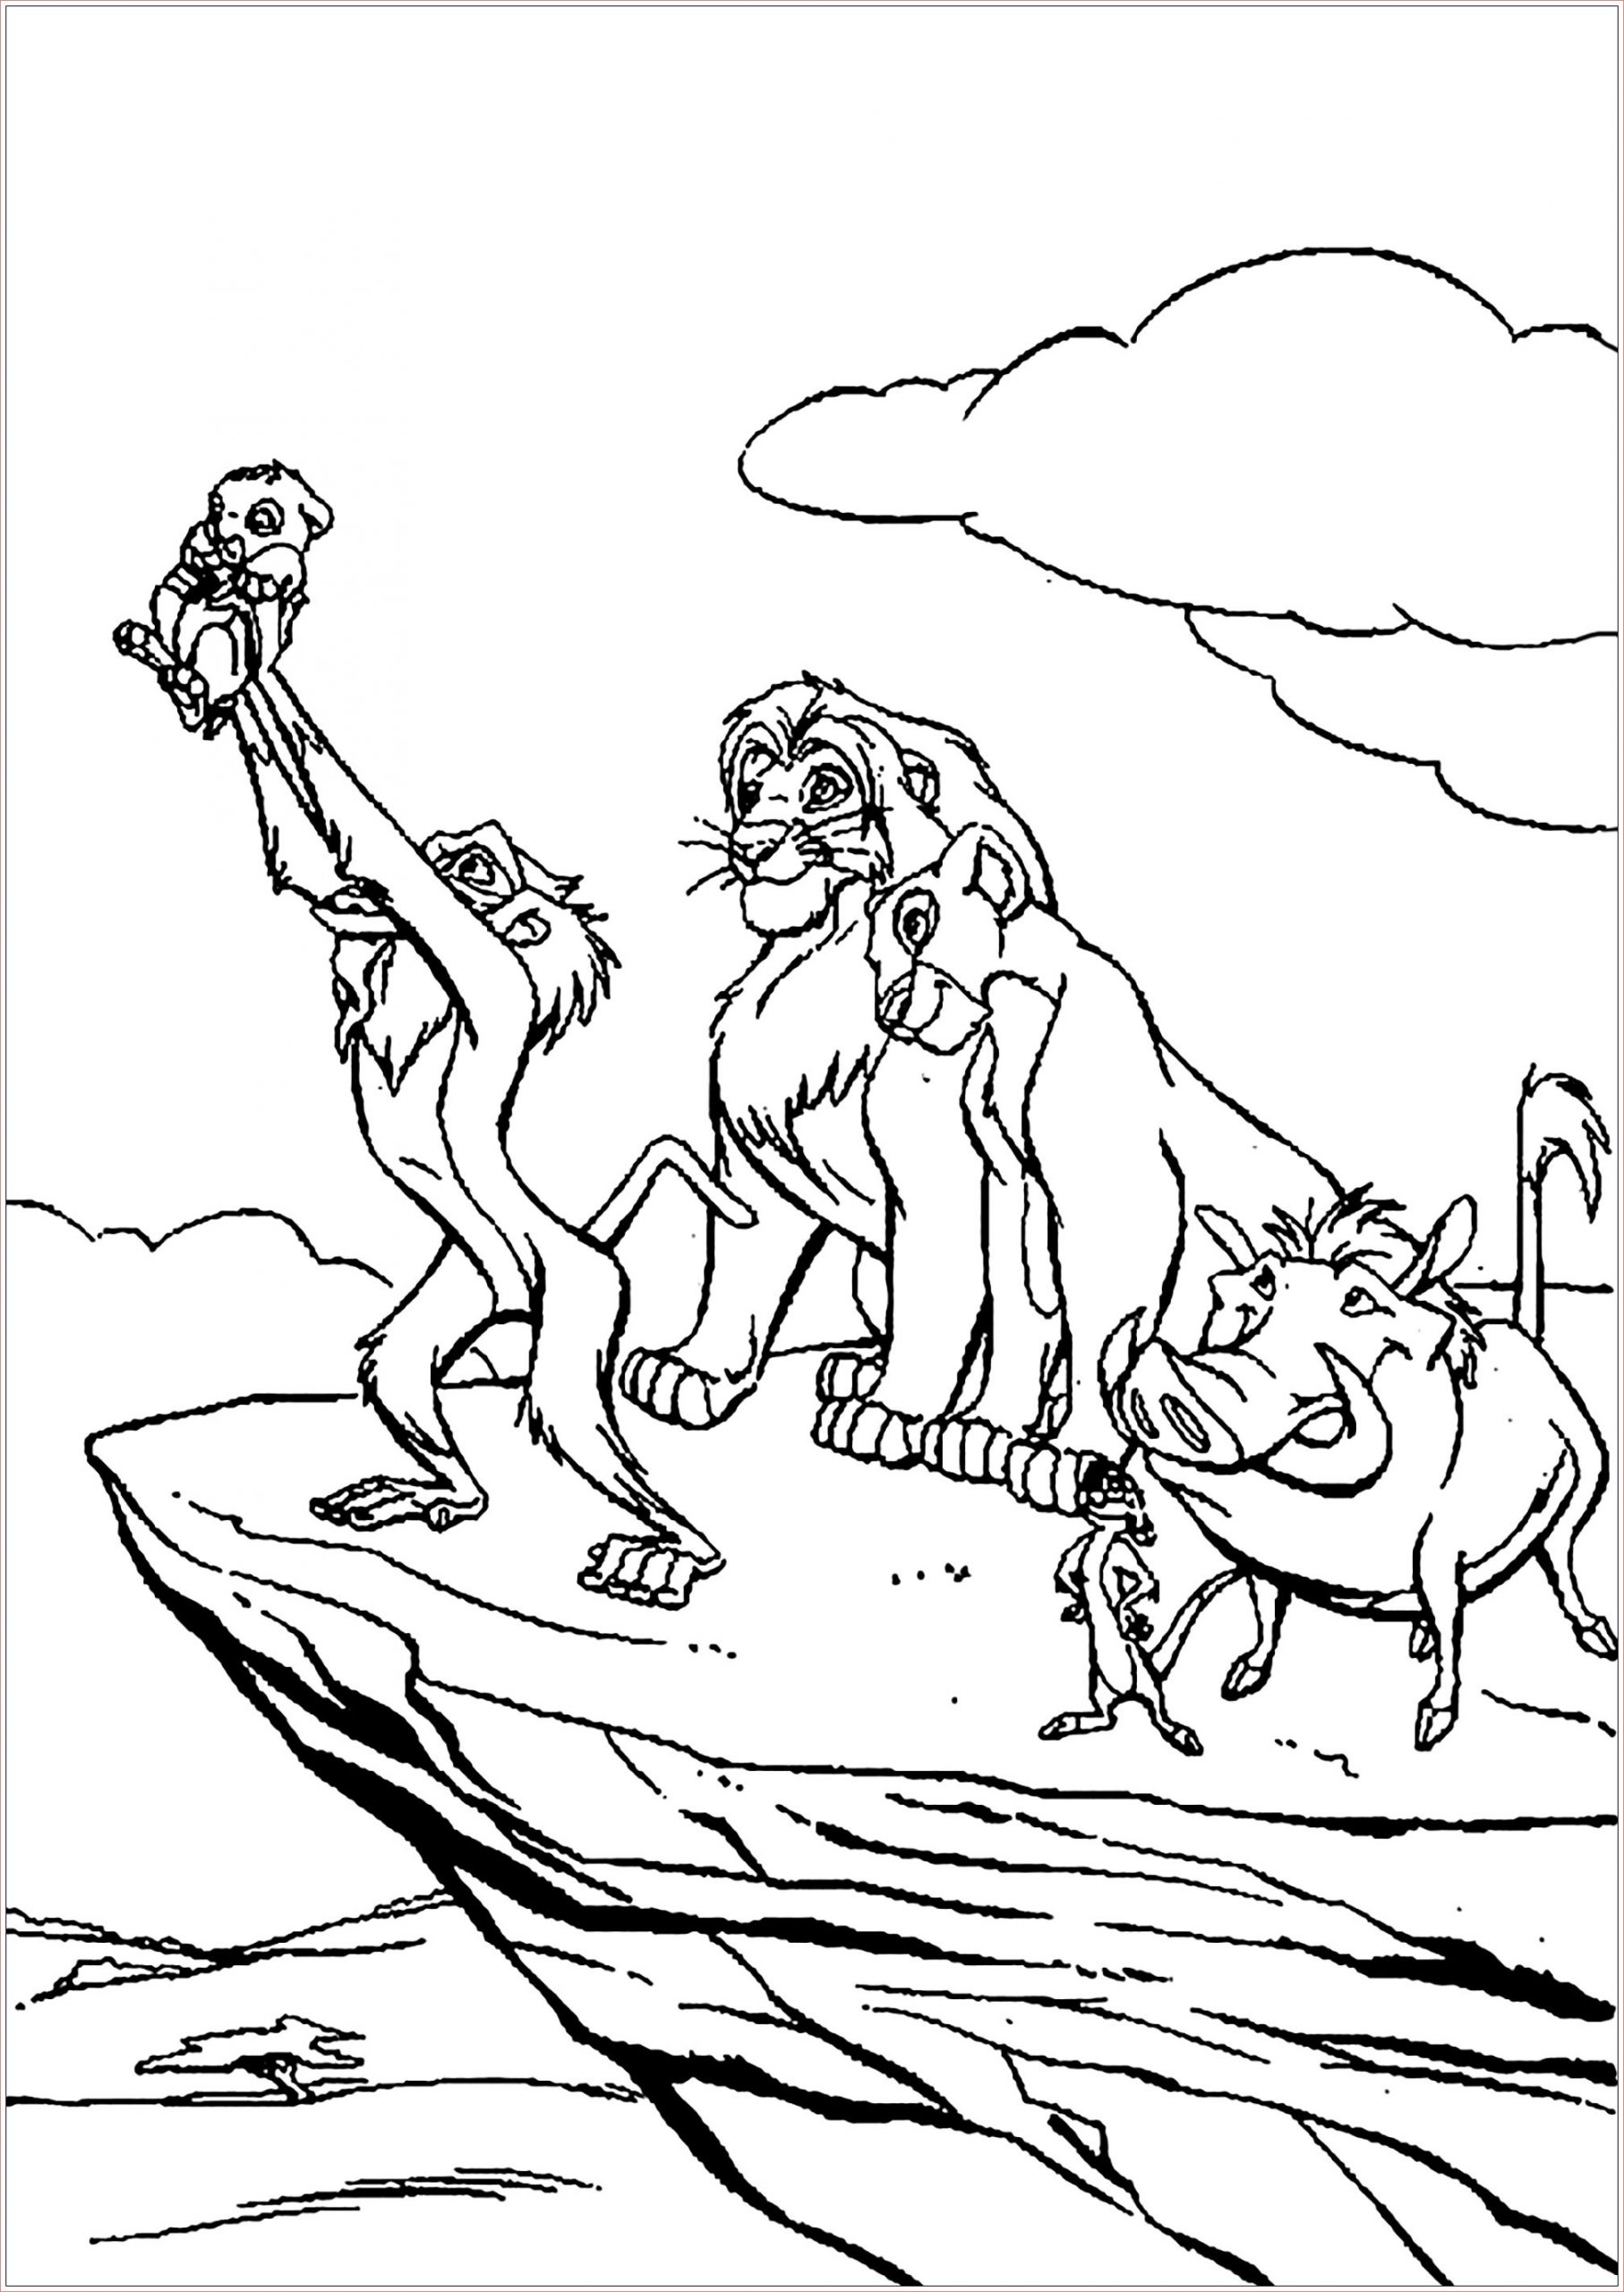 image=the lion king coloring pages for children the lion king 1